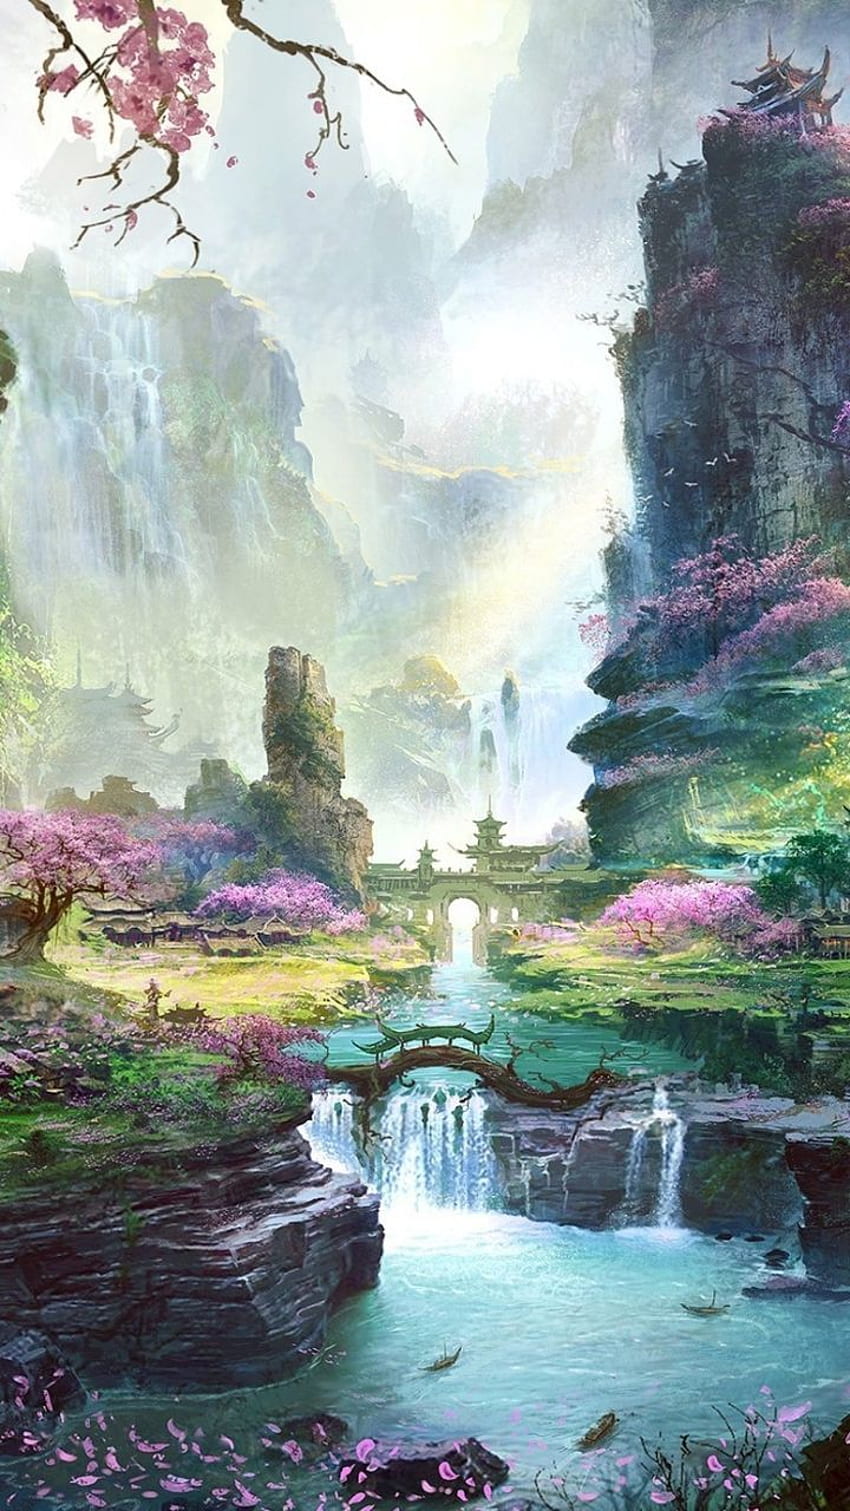 Fantasy Wallpaper Browse Fantasy Wallpaper with collections of Anime  Beautiful Fantasy Forest Iph  Phone wallpaper Fantasy background Phone  wallpaper images